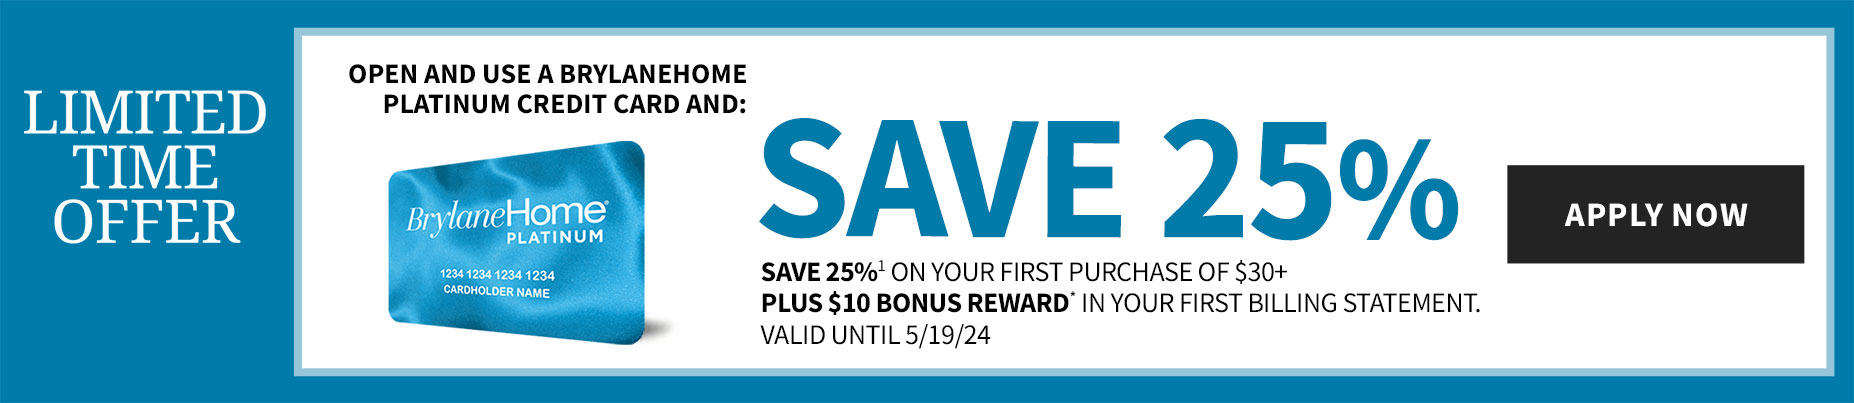 Open and use a BrylaneHome platinum Credit Card and save 25% 1 on your first purchase of $30+ 
                 PLUS $10 bonus reward* in your first billing statement. 
                 Valid until 5/19/24